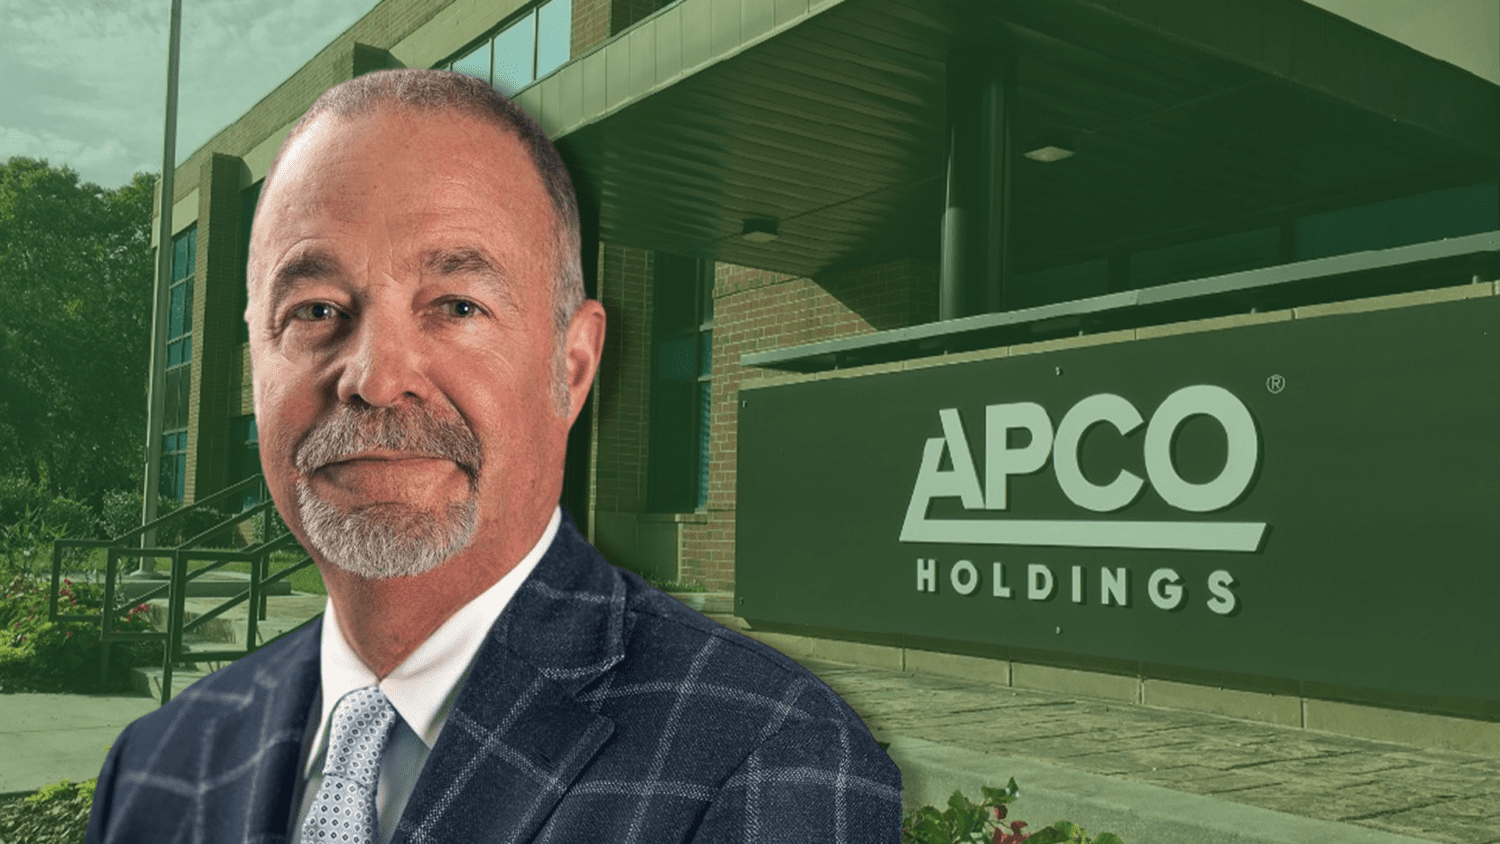 APCO Holdings, LLC, acquires National Auto Care, creating nationwide F